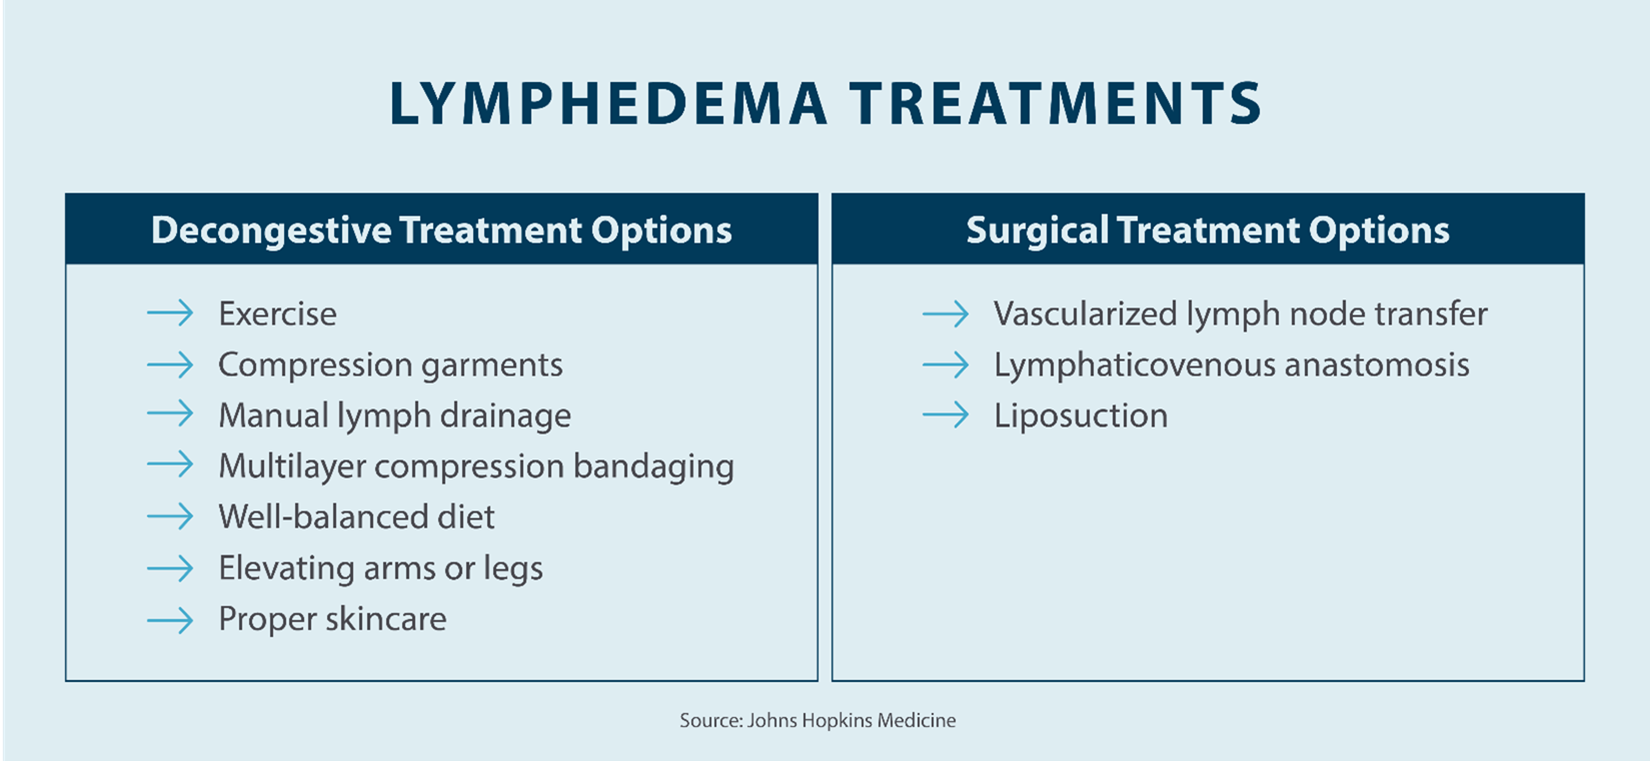 lymphedema treatments; decongestive treatment options and surgical treatment options